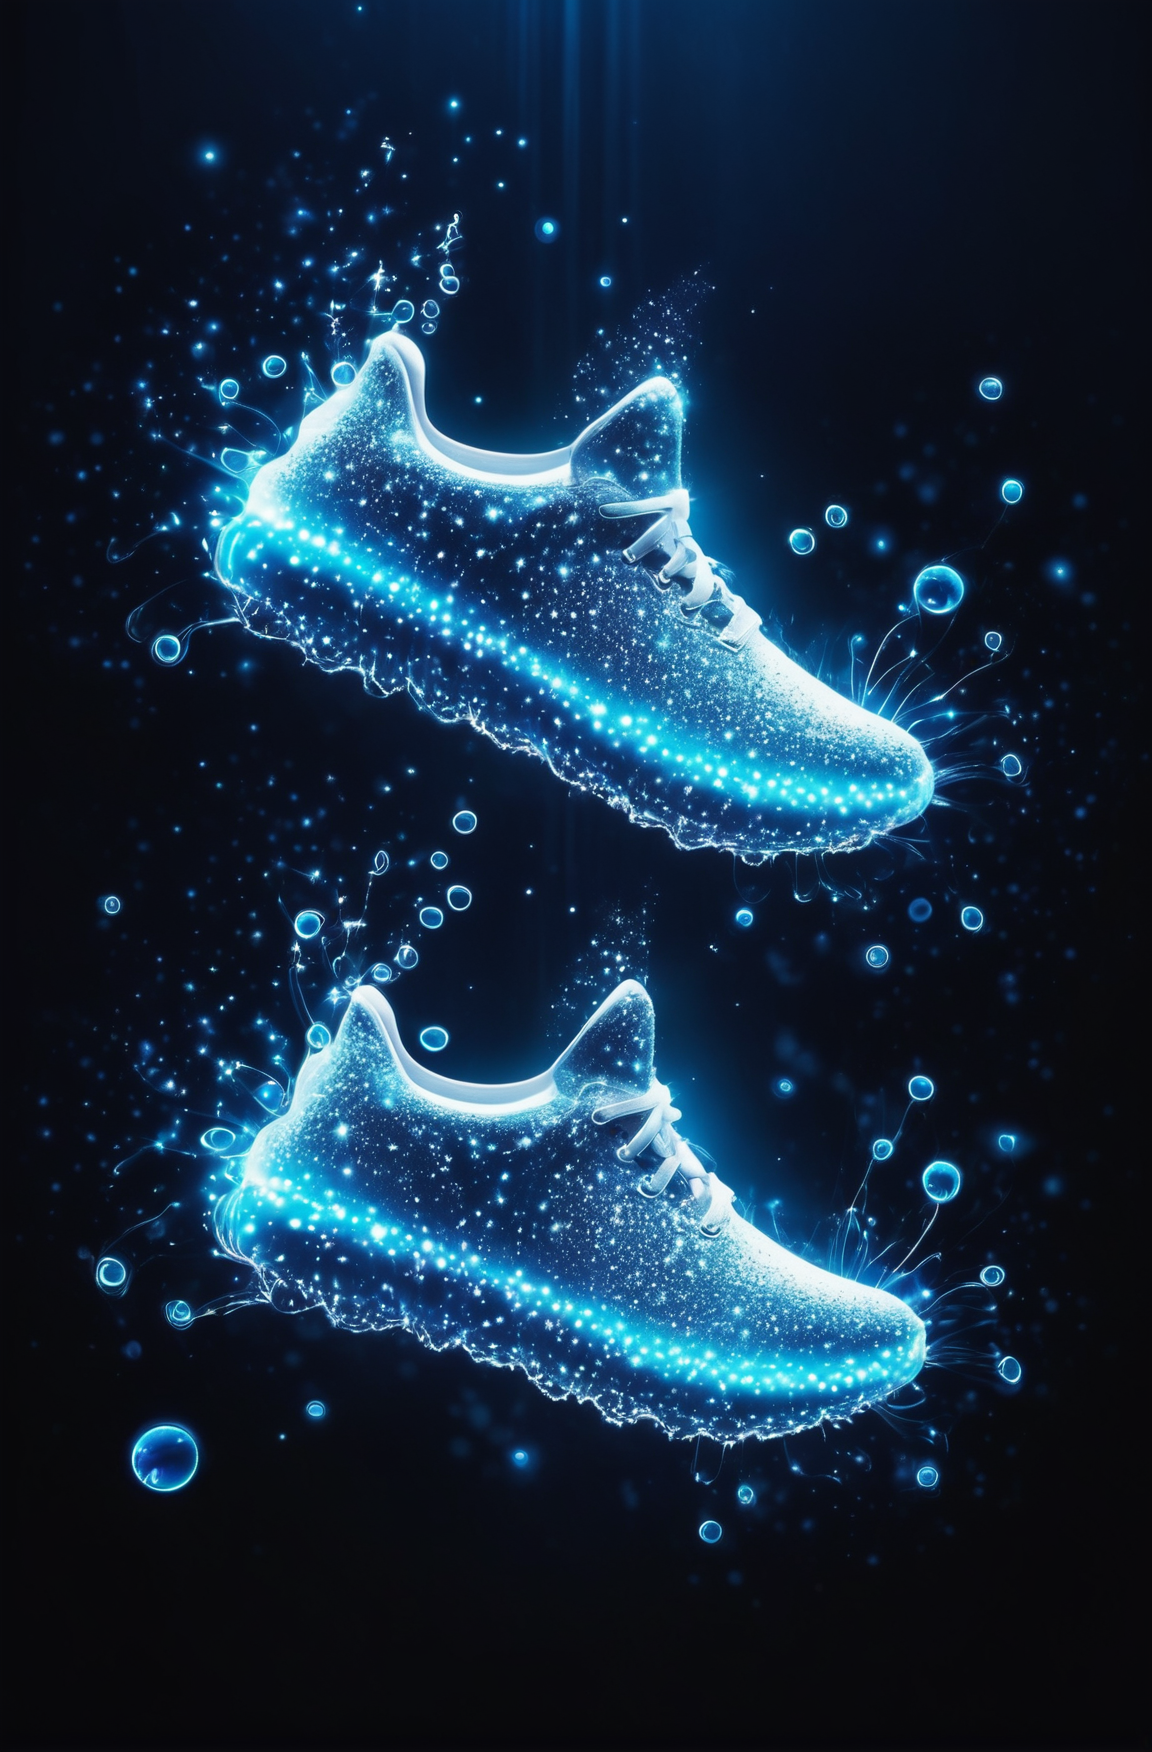 sneakers, bioluminescent, bright luminescence white light, made out of light beams, bubbles, particles, sparkles, glitch